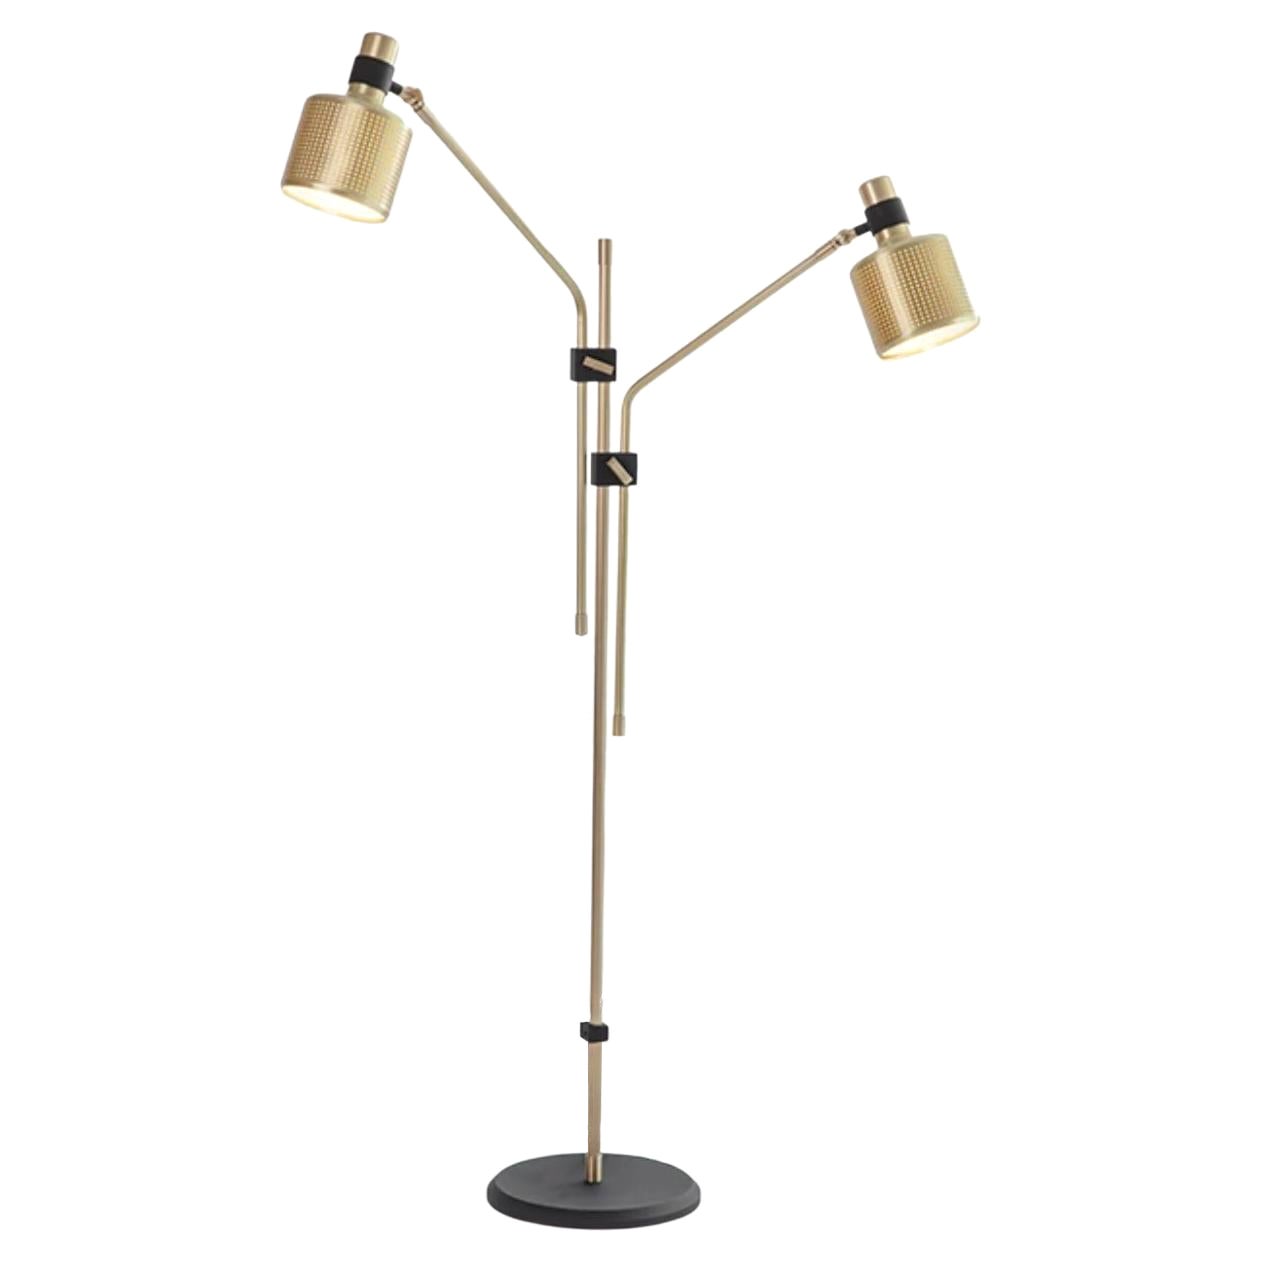 Double Riddle Floor Lamp by Bert Frank